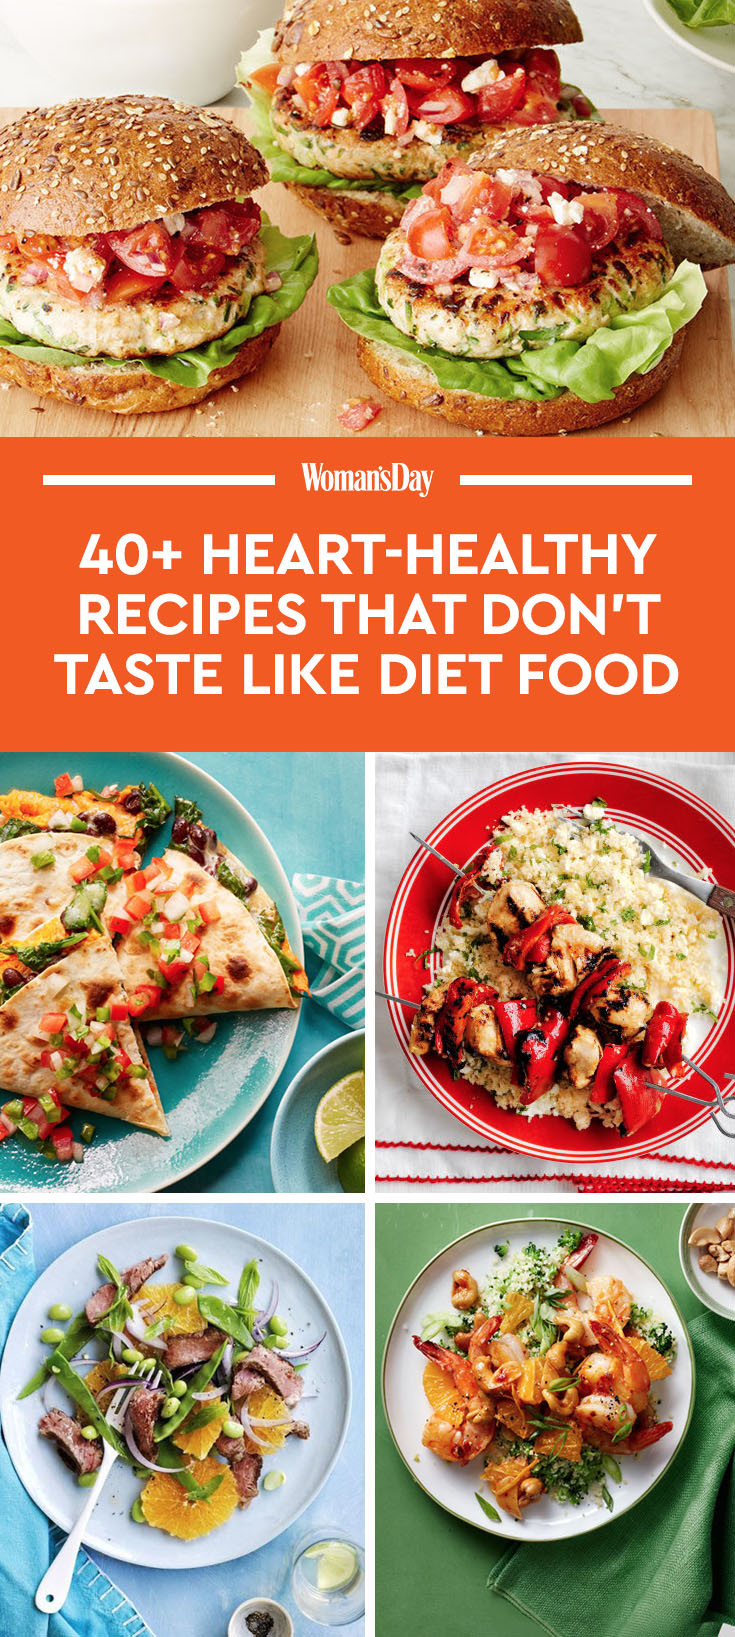 Heart Healthy Lunch Recipes
 55 Heart Healthy Dinner Recipes That Don t Taste Like Diet